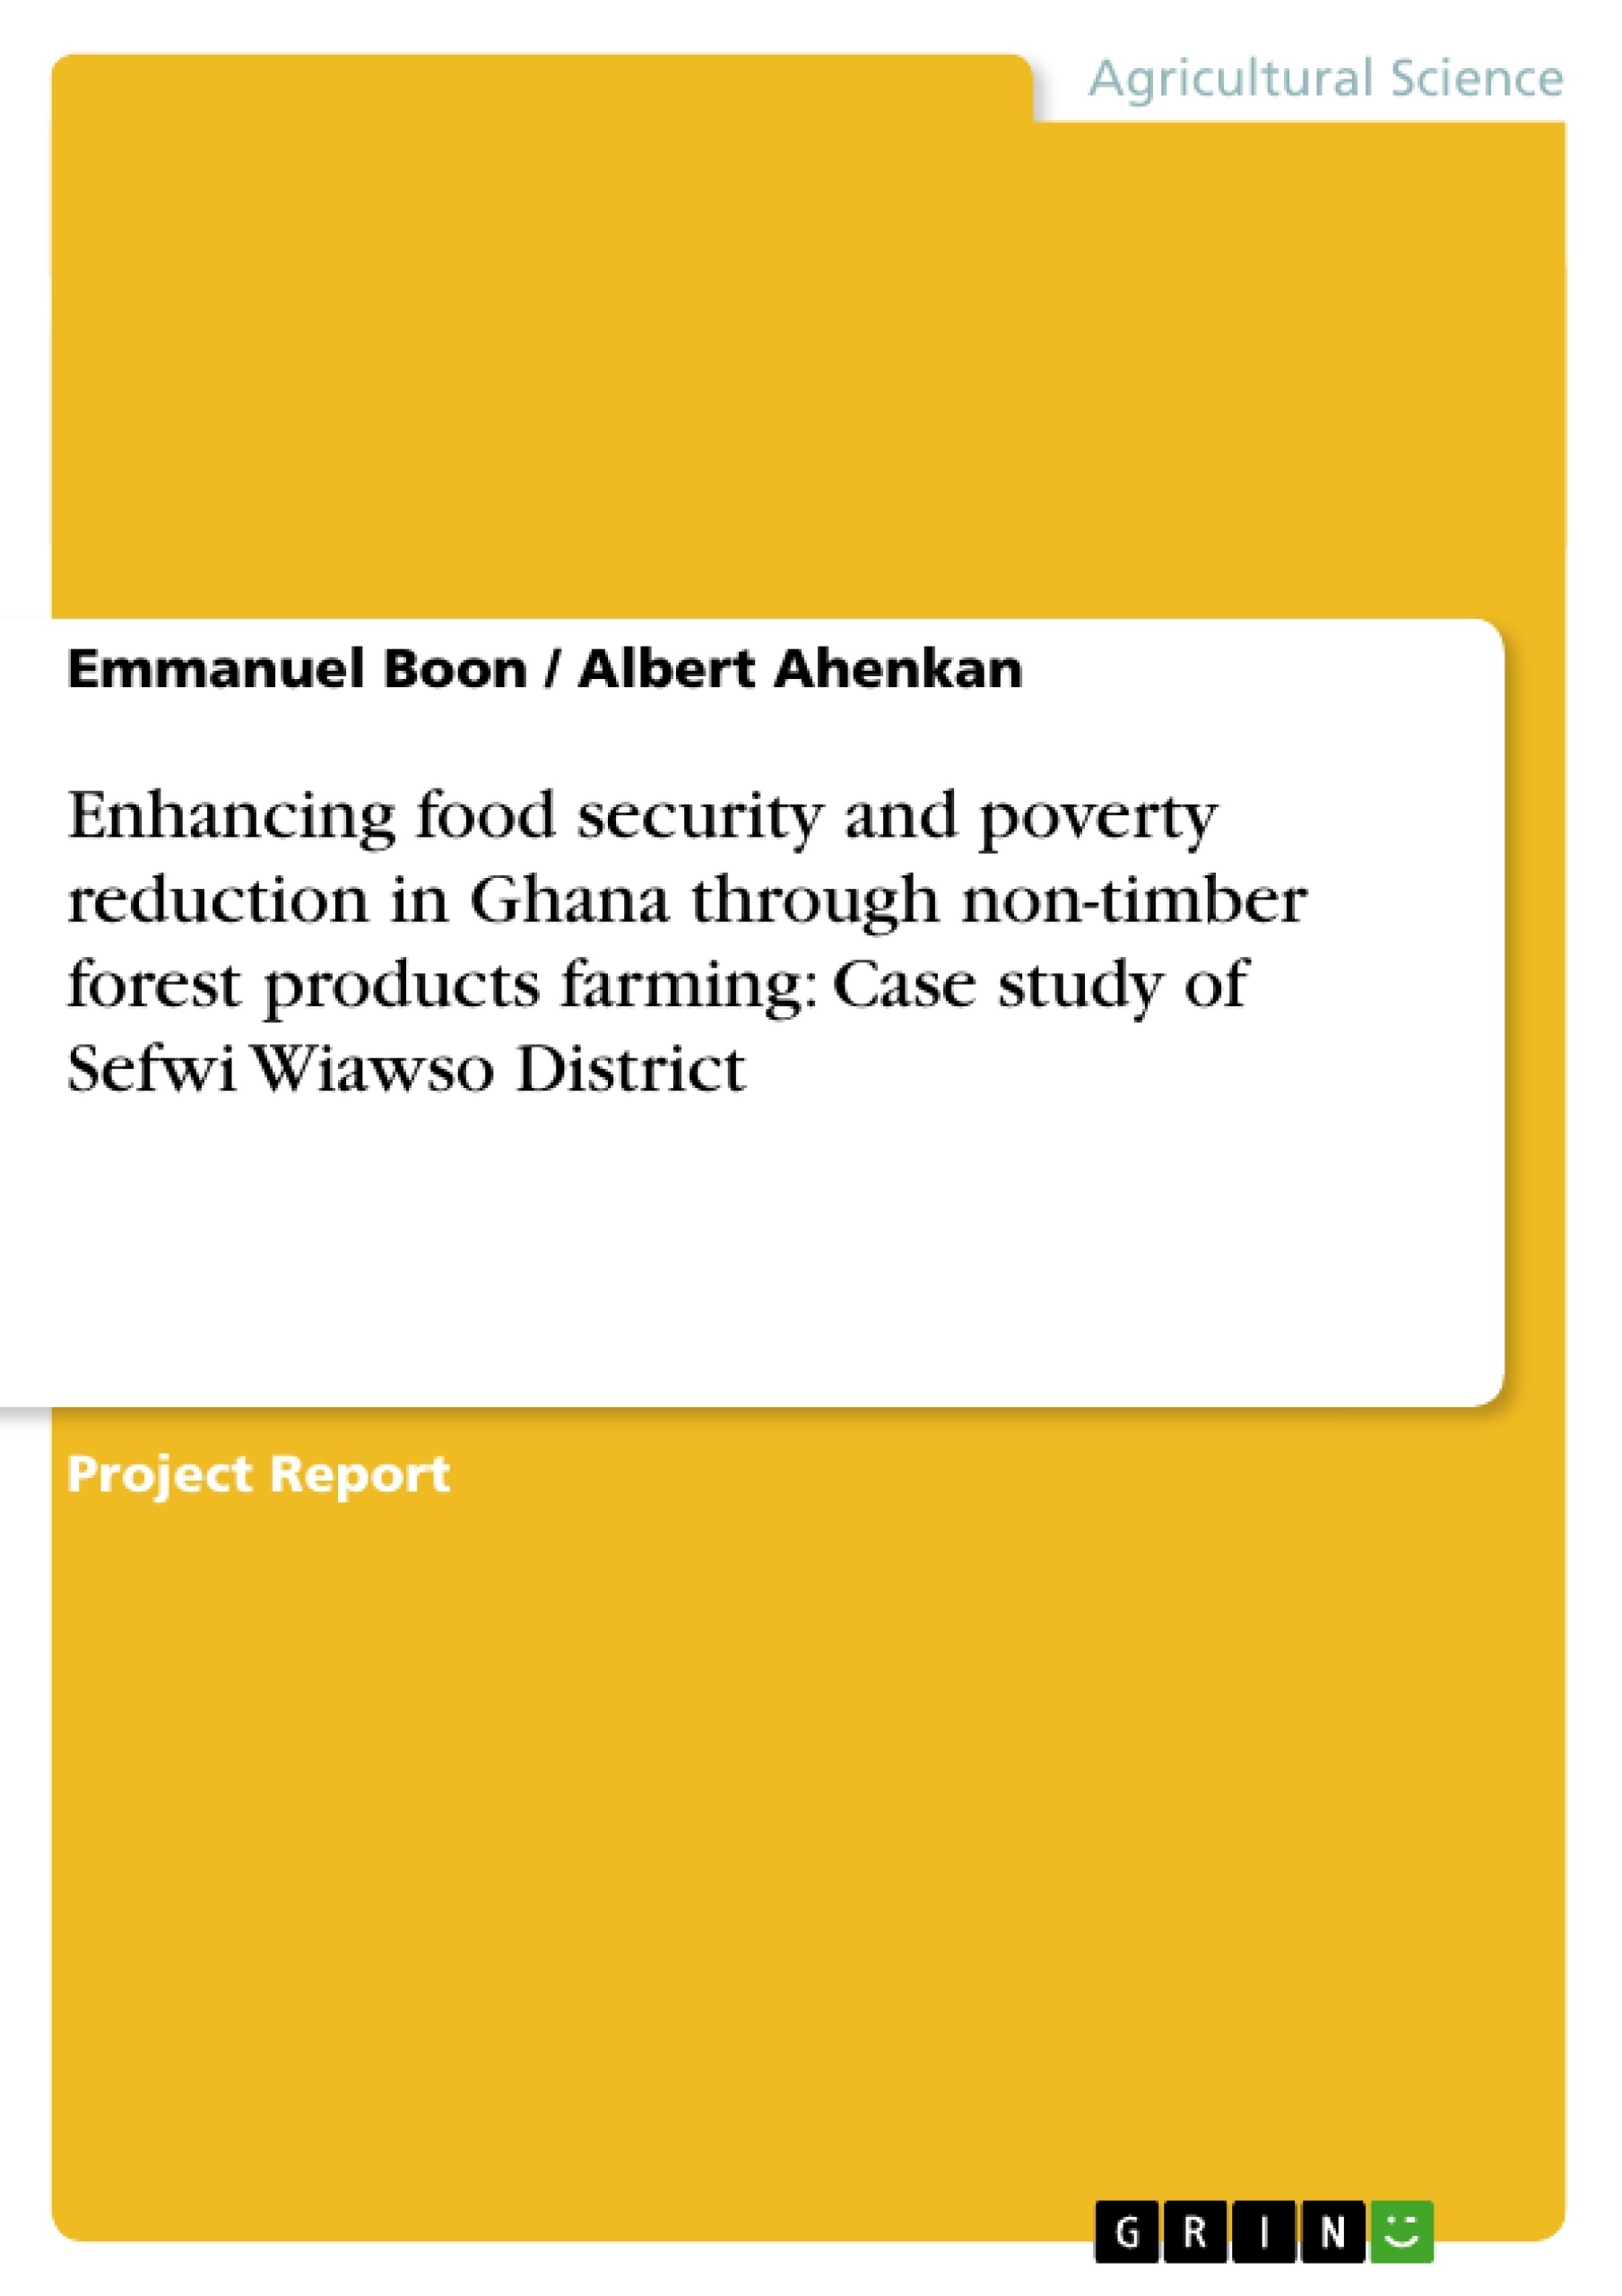 Title: Enhancing food security and poverty reduction in Ghana through non-timber forest products farming: Case study of Sefwi Wiawso District